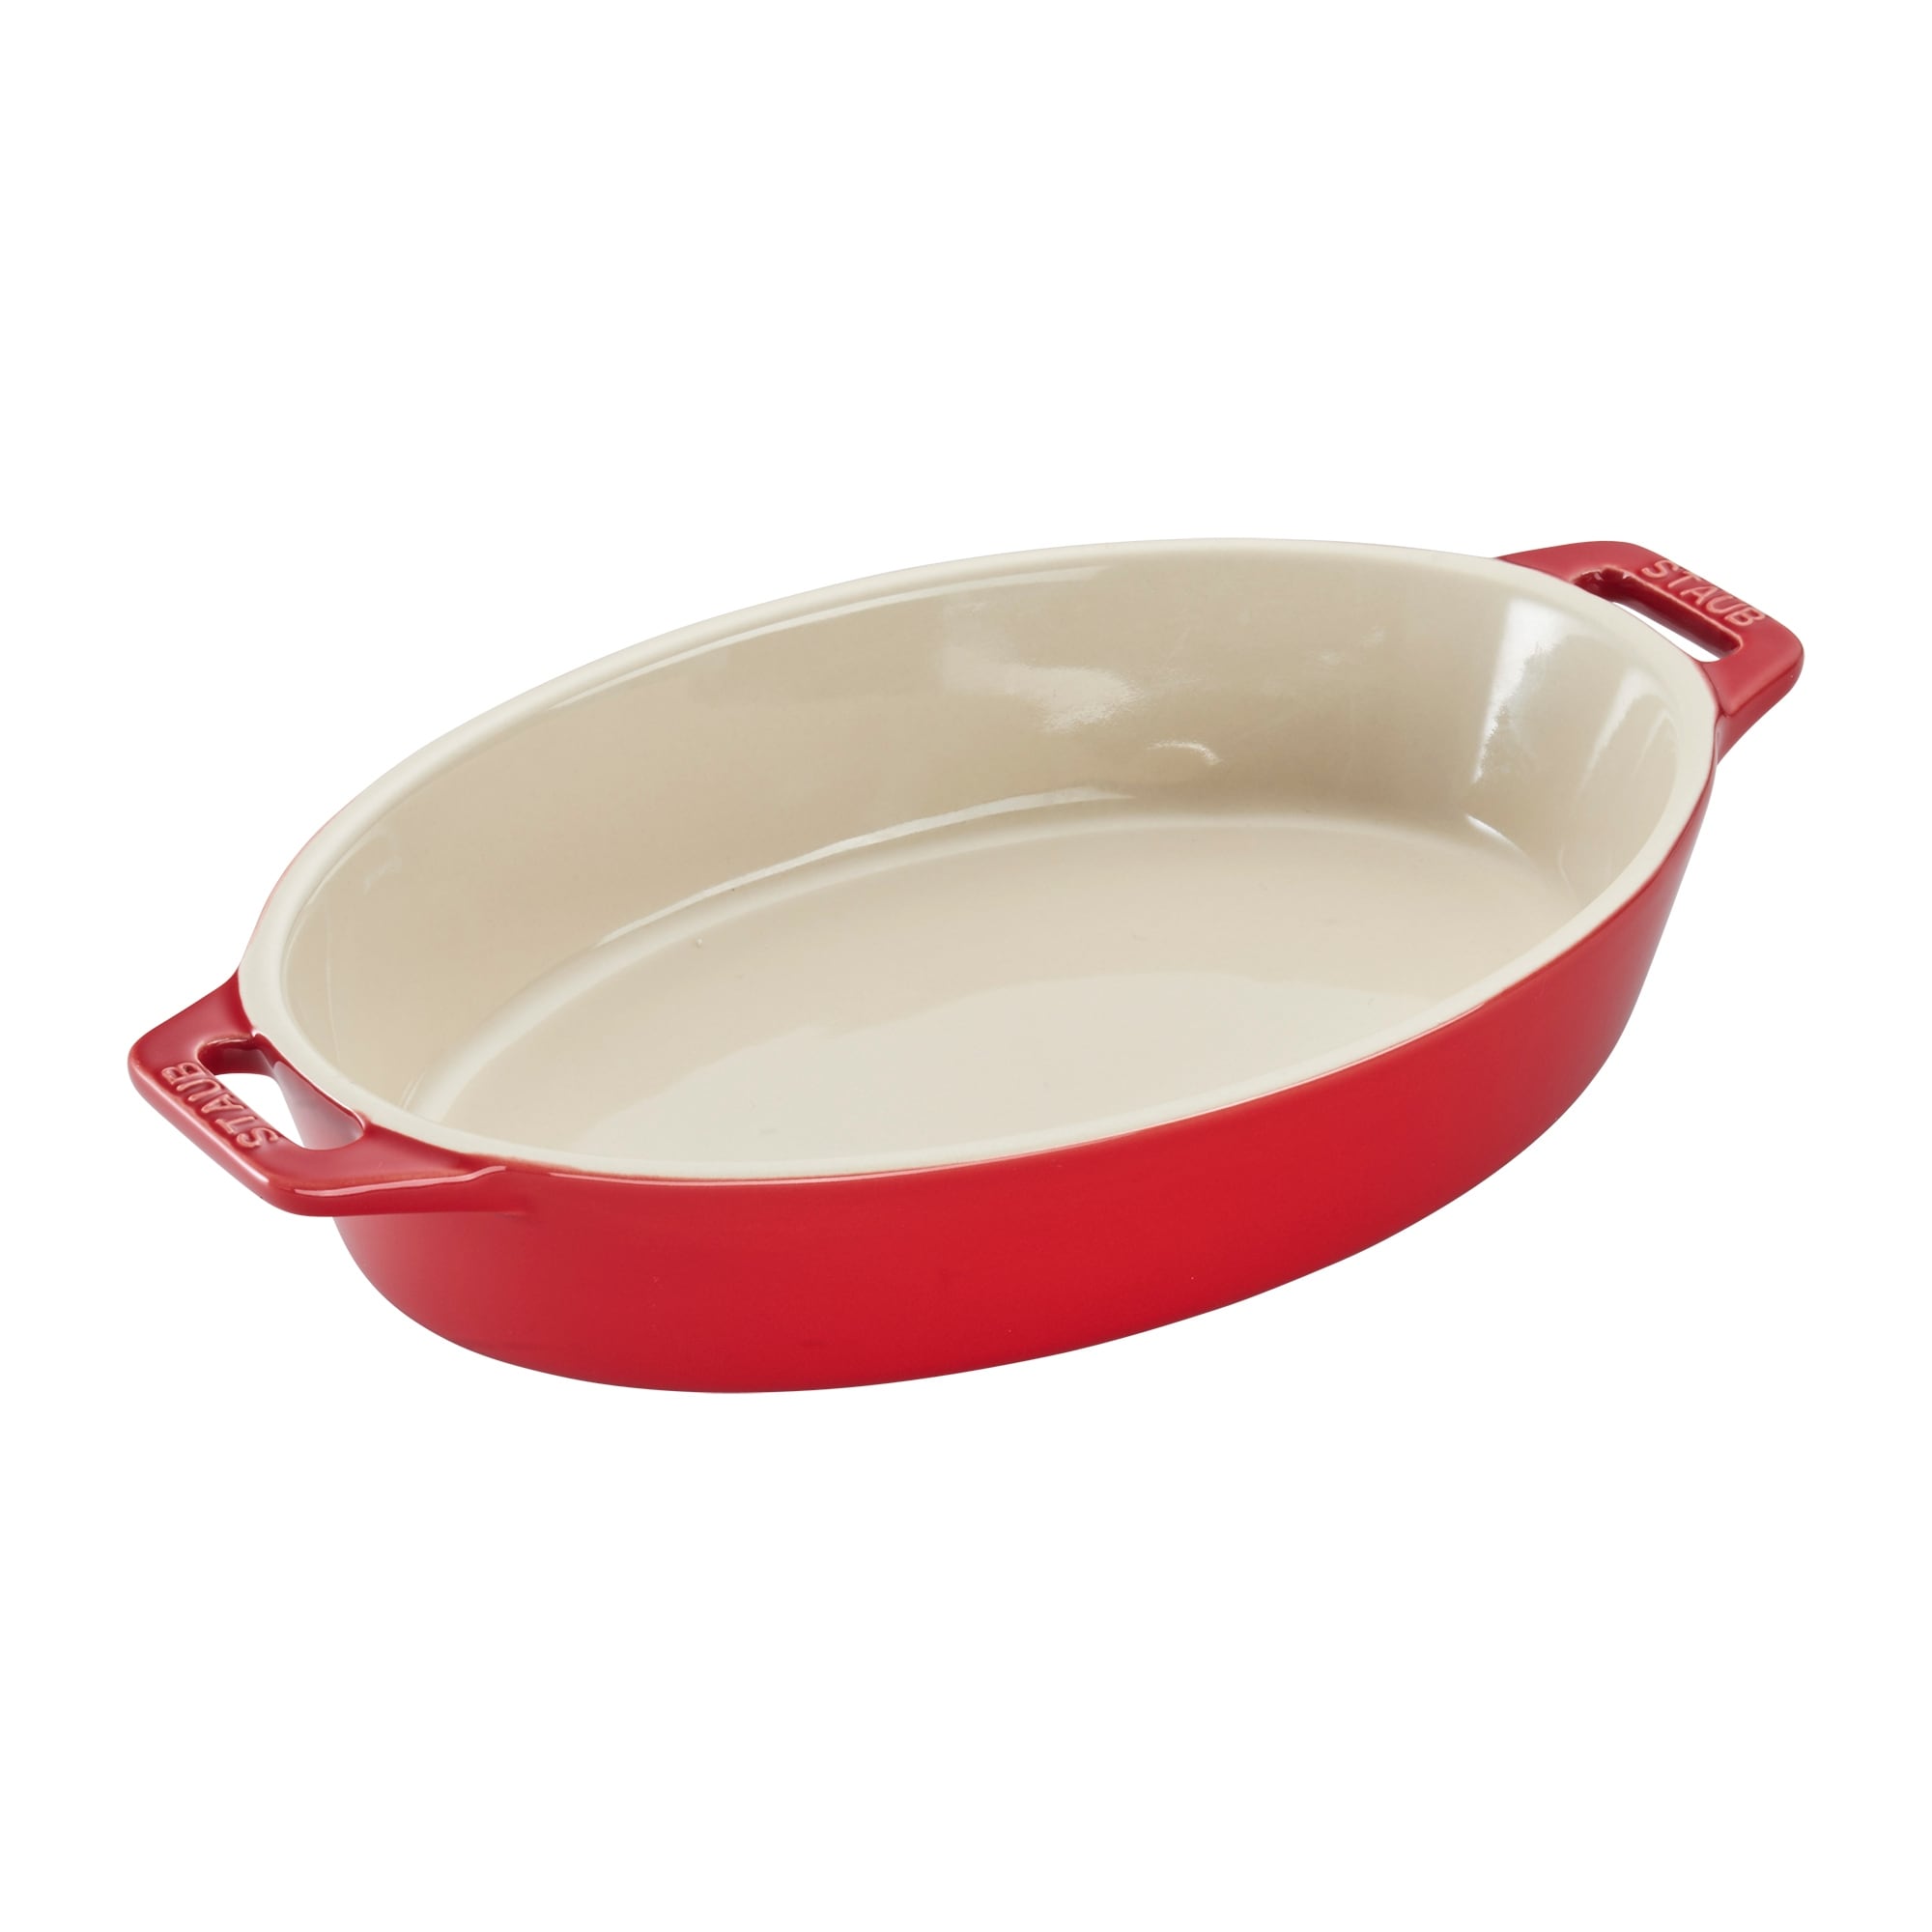 https://ak1.ostkcdn.com/images/products/is/images/direct/d7bcfb802751218a13046c13ae2b116889771bd3/STAUB-Ceramic-9-inch-Oval-Baking-Dish.jpg